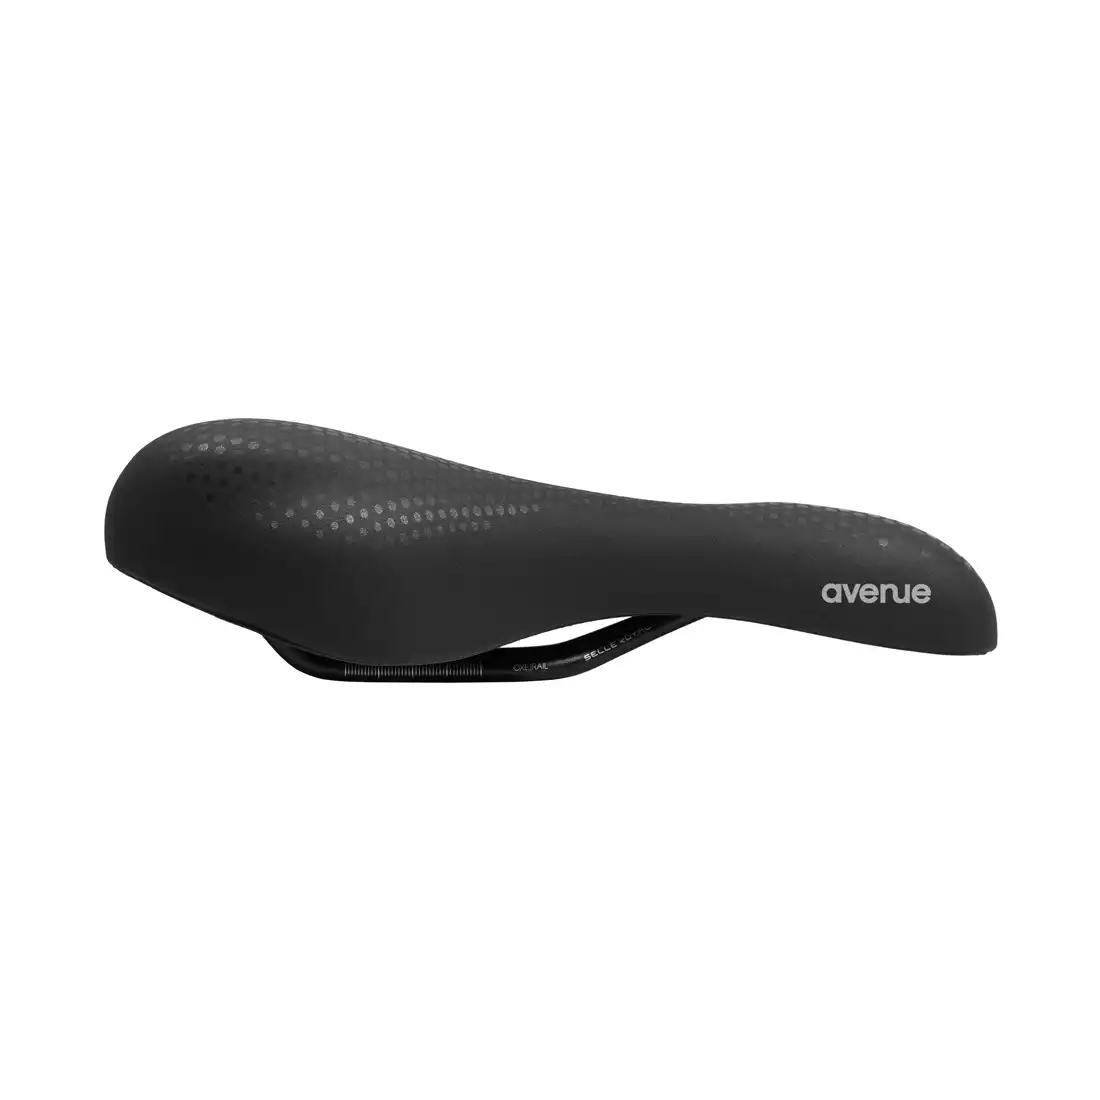 SELLEROY ALAVENUE CLASSIC ATHLETIC 45° bicycle seat, black